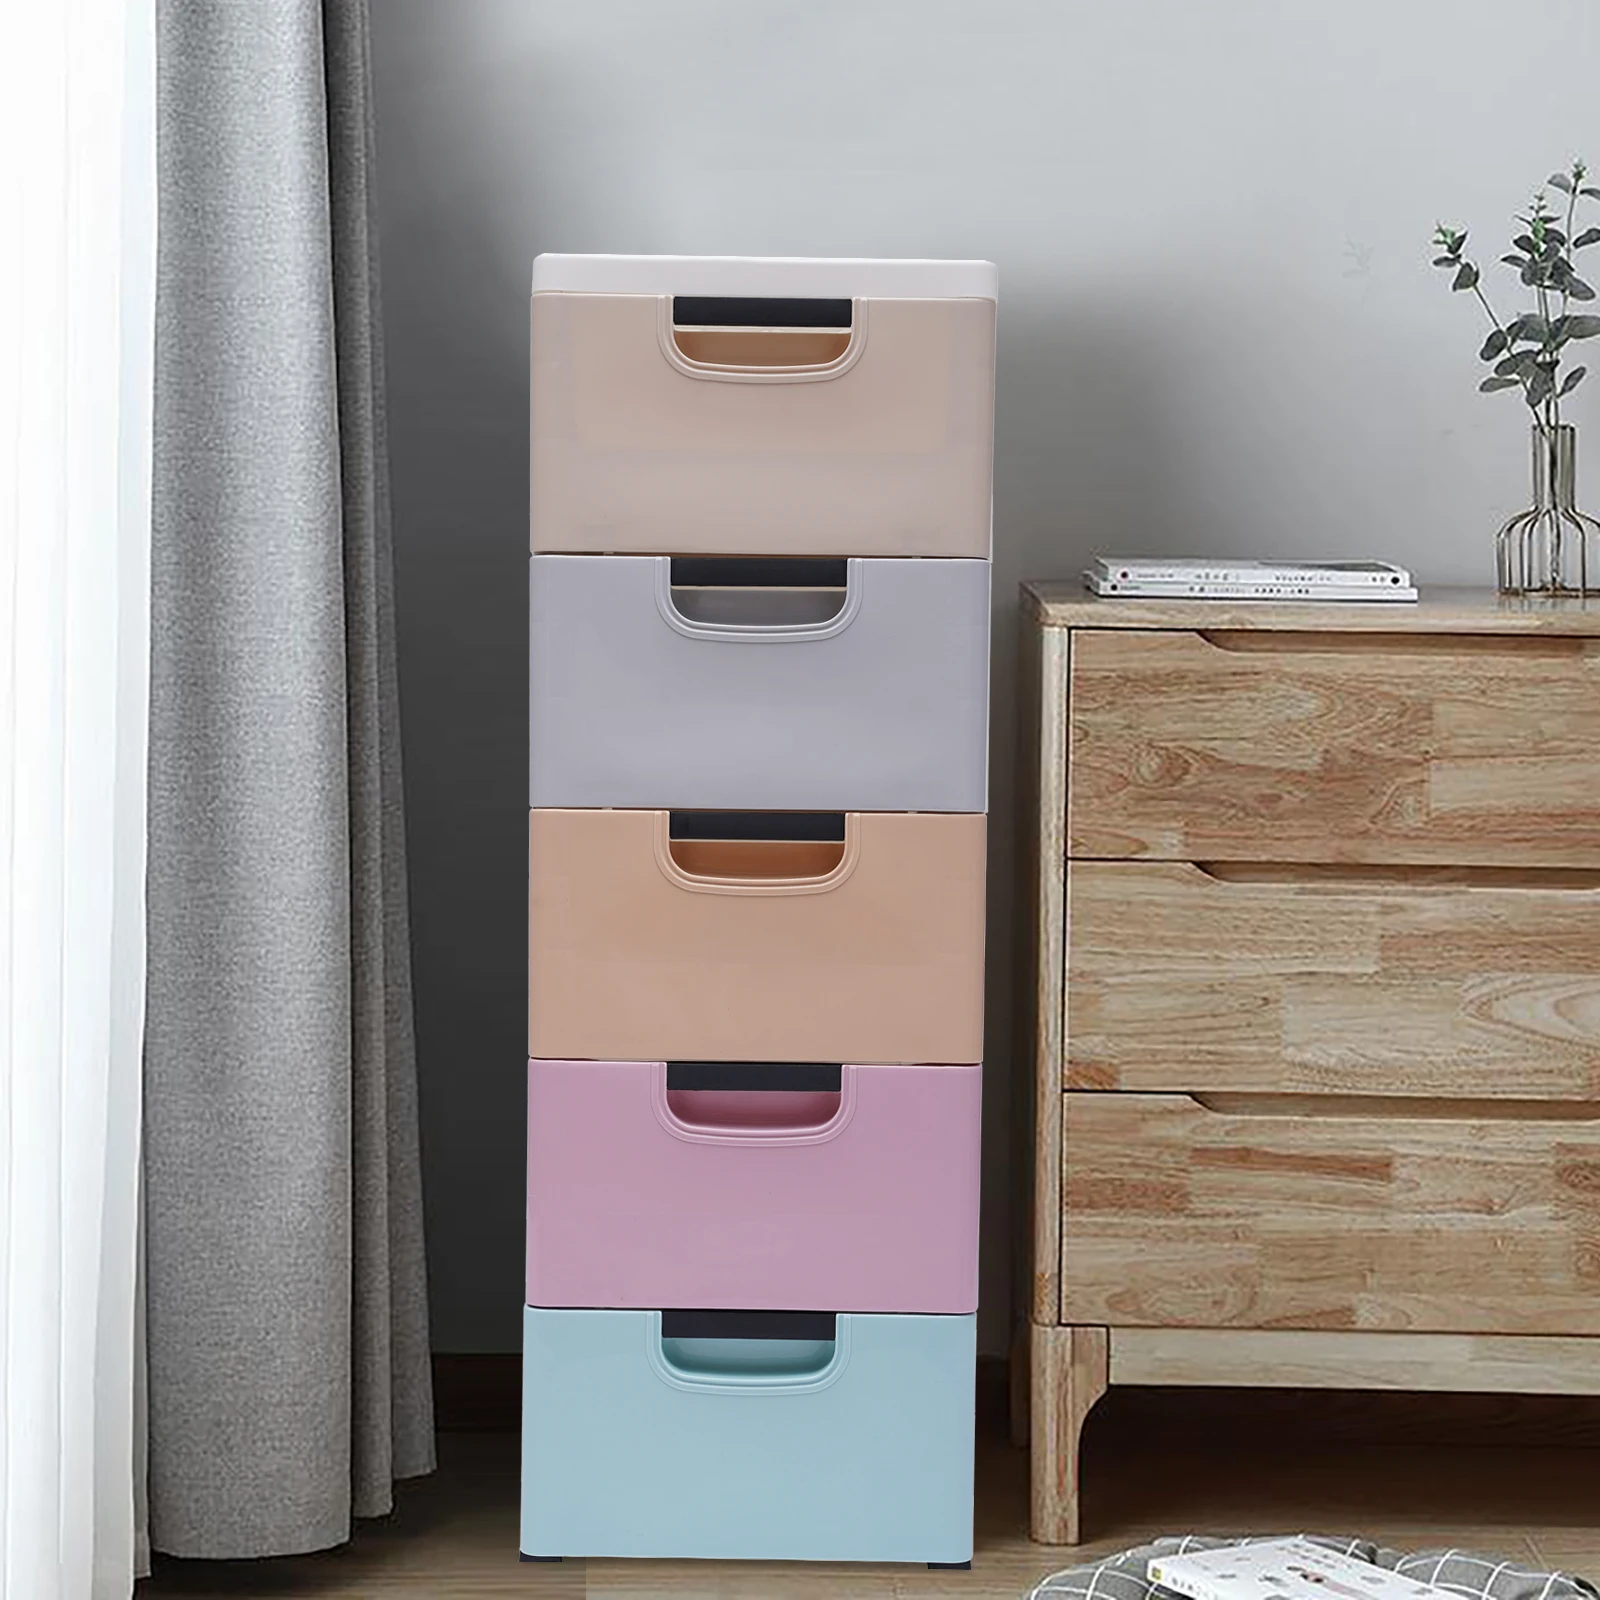 

Slim Storage Chest Plastic Narrow Drawers Storage Cabinet 5 Drawer Vertical, Clothes Storage Tower Tall Small Chest Closet